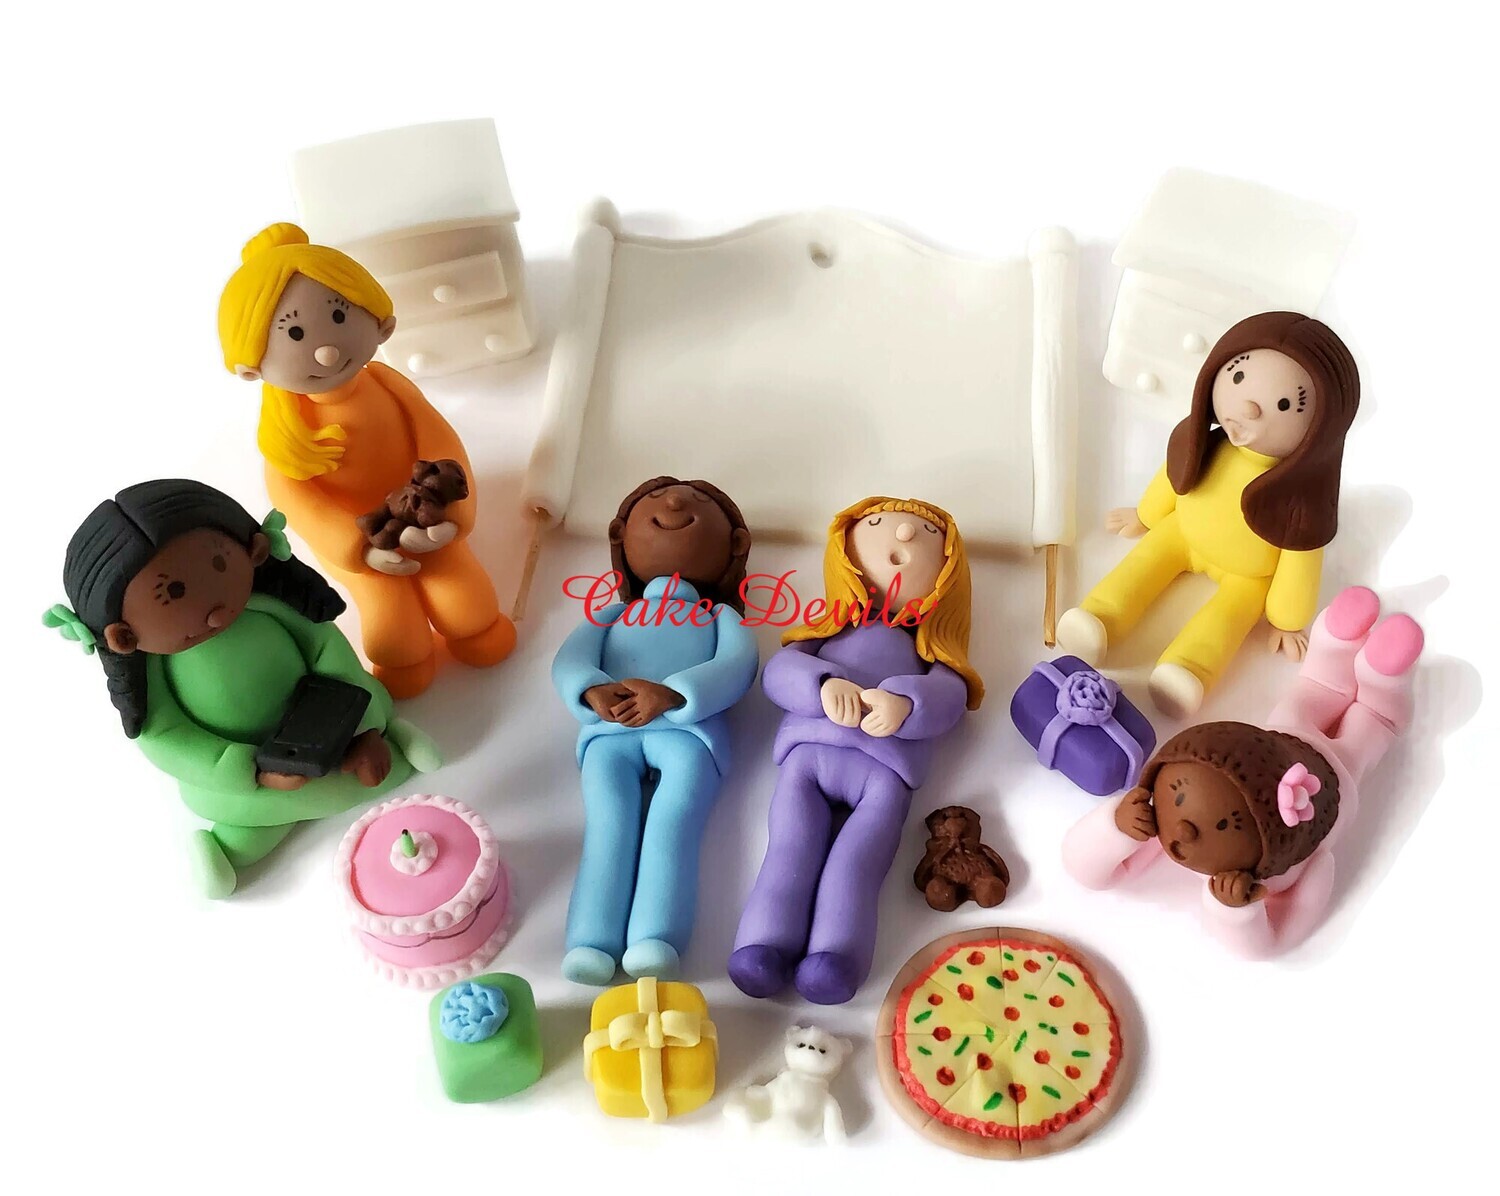 Fondant Slumber Party, Sleepover, Pajama Party Cake Toppers - Fondant Girls, food, and bed pieces